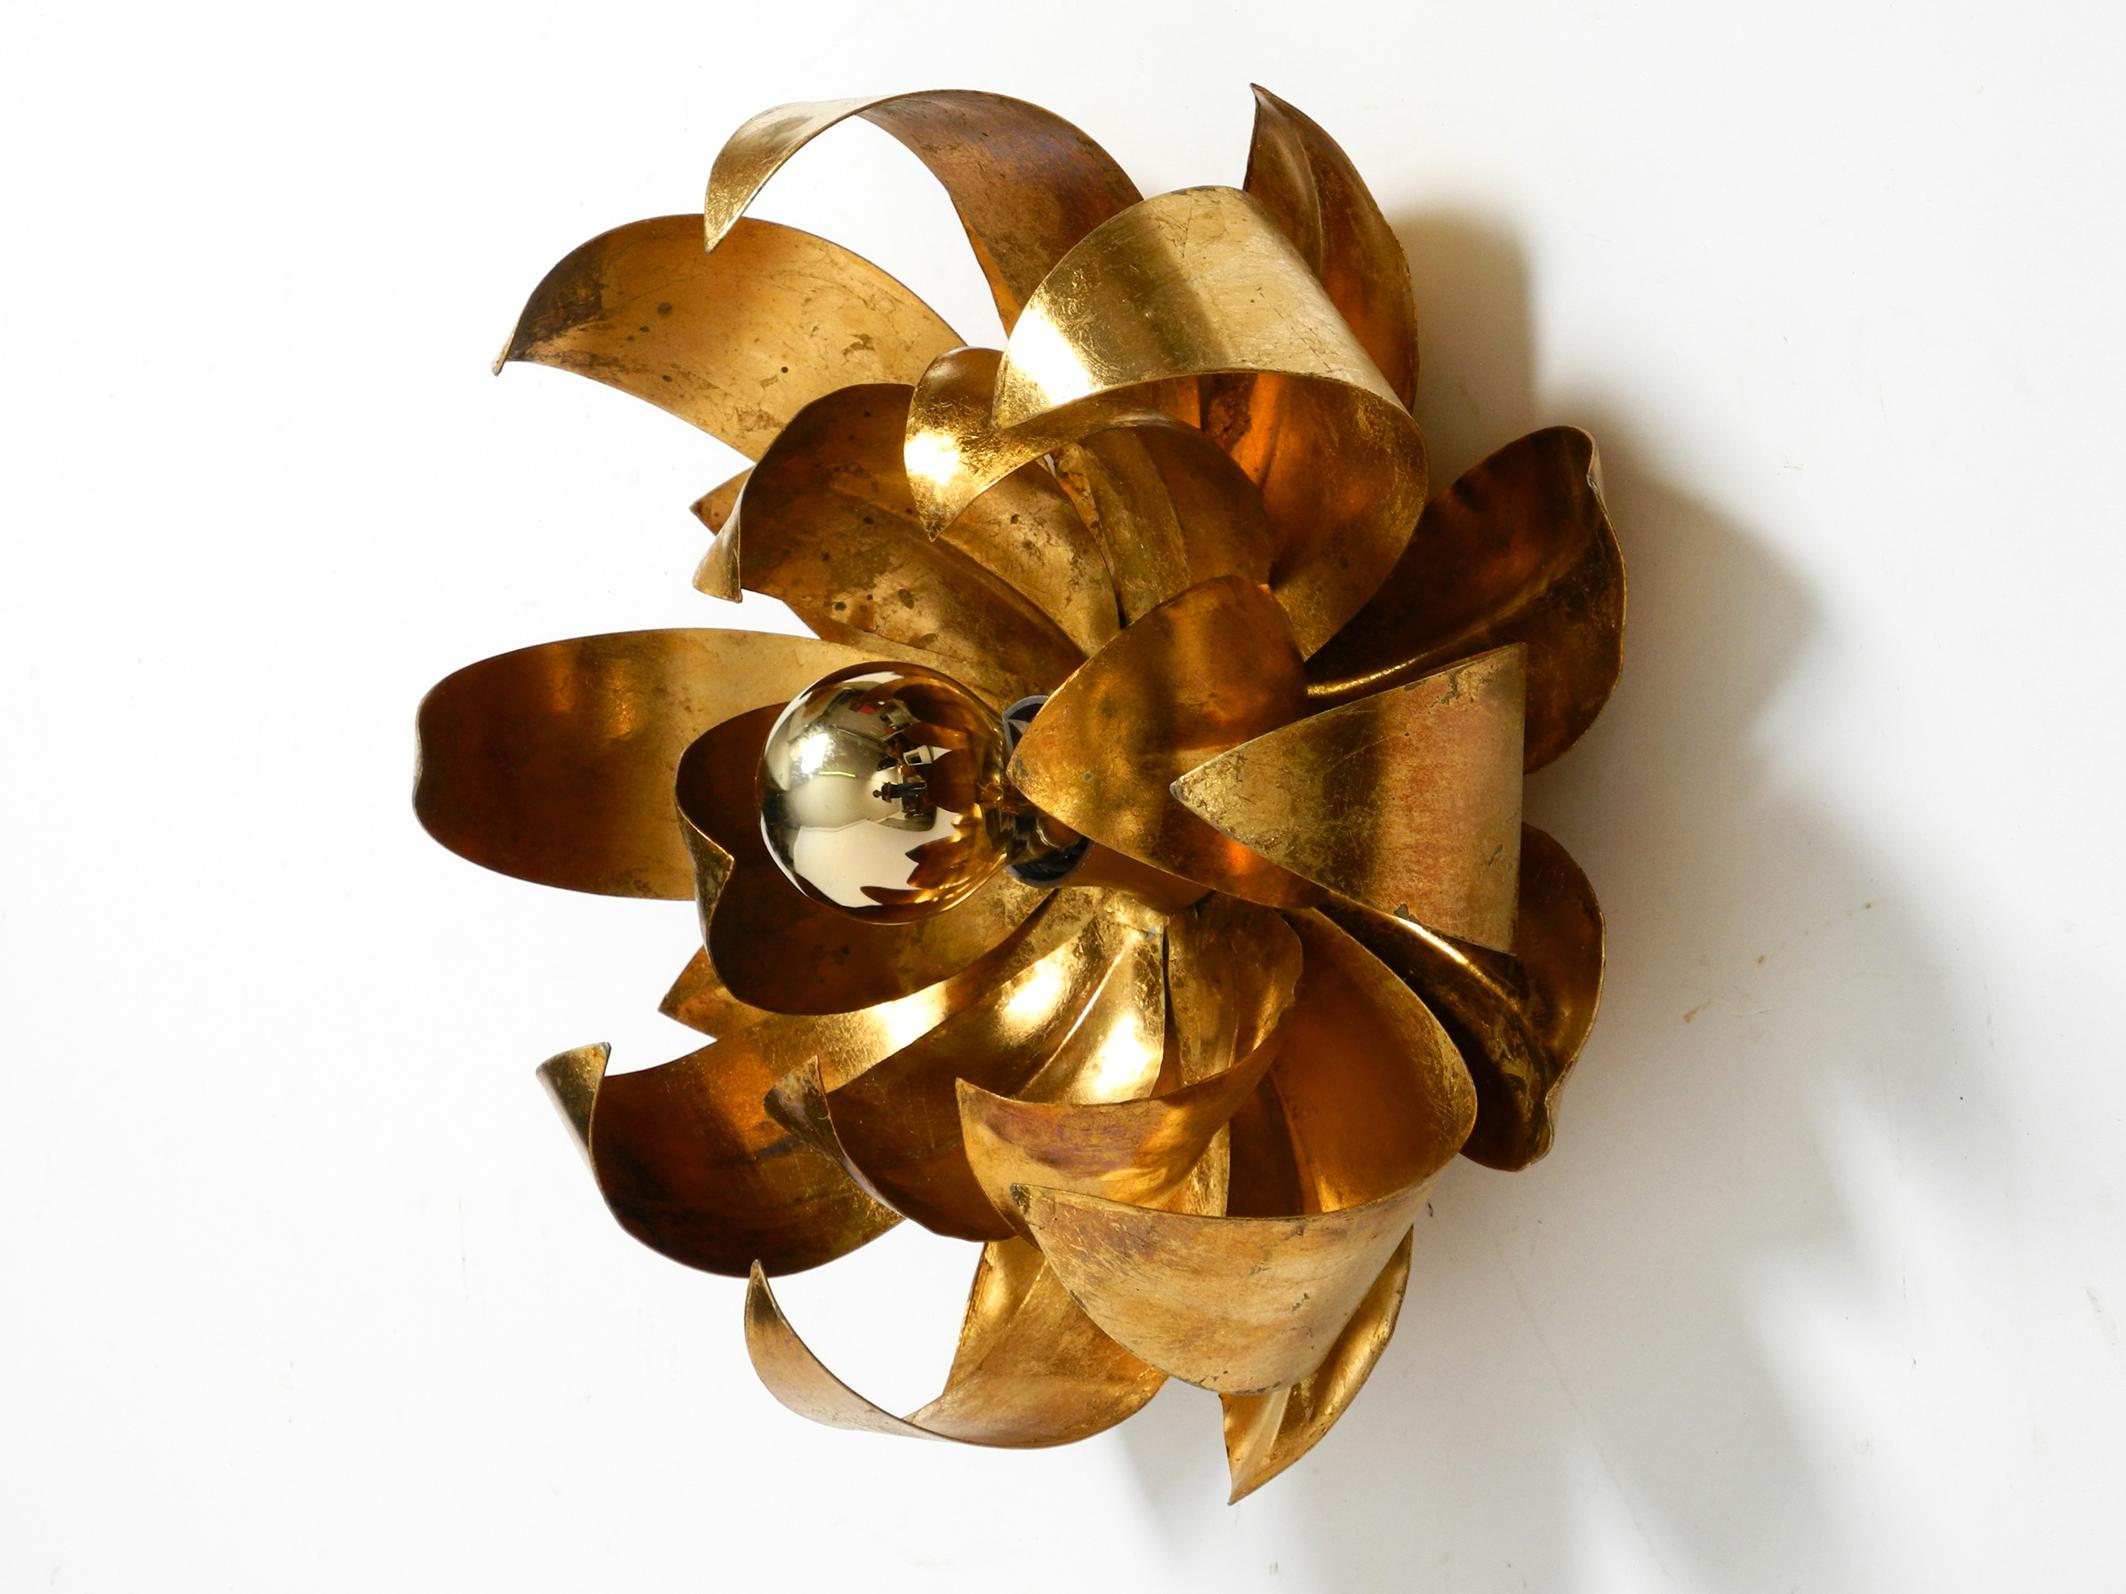 Beautiful 1970s gold plated floral Hollywood Regency wall or ceiling lamp.
Design with large long curved leaves.
Very elegant, high-quality design. Made in Germany.
Fully functional with one E27 socket up to 60W.
Very nice indirect light with a gold